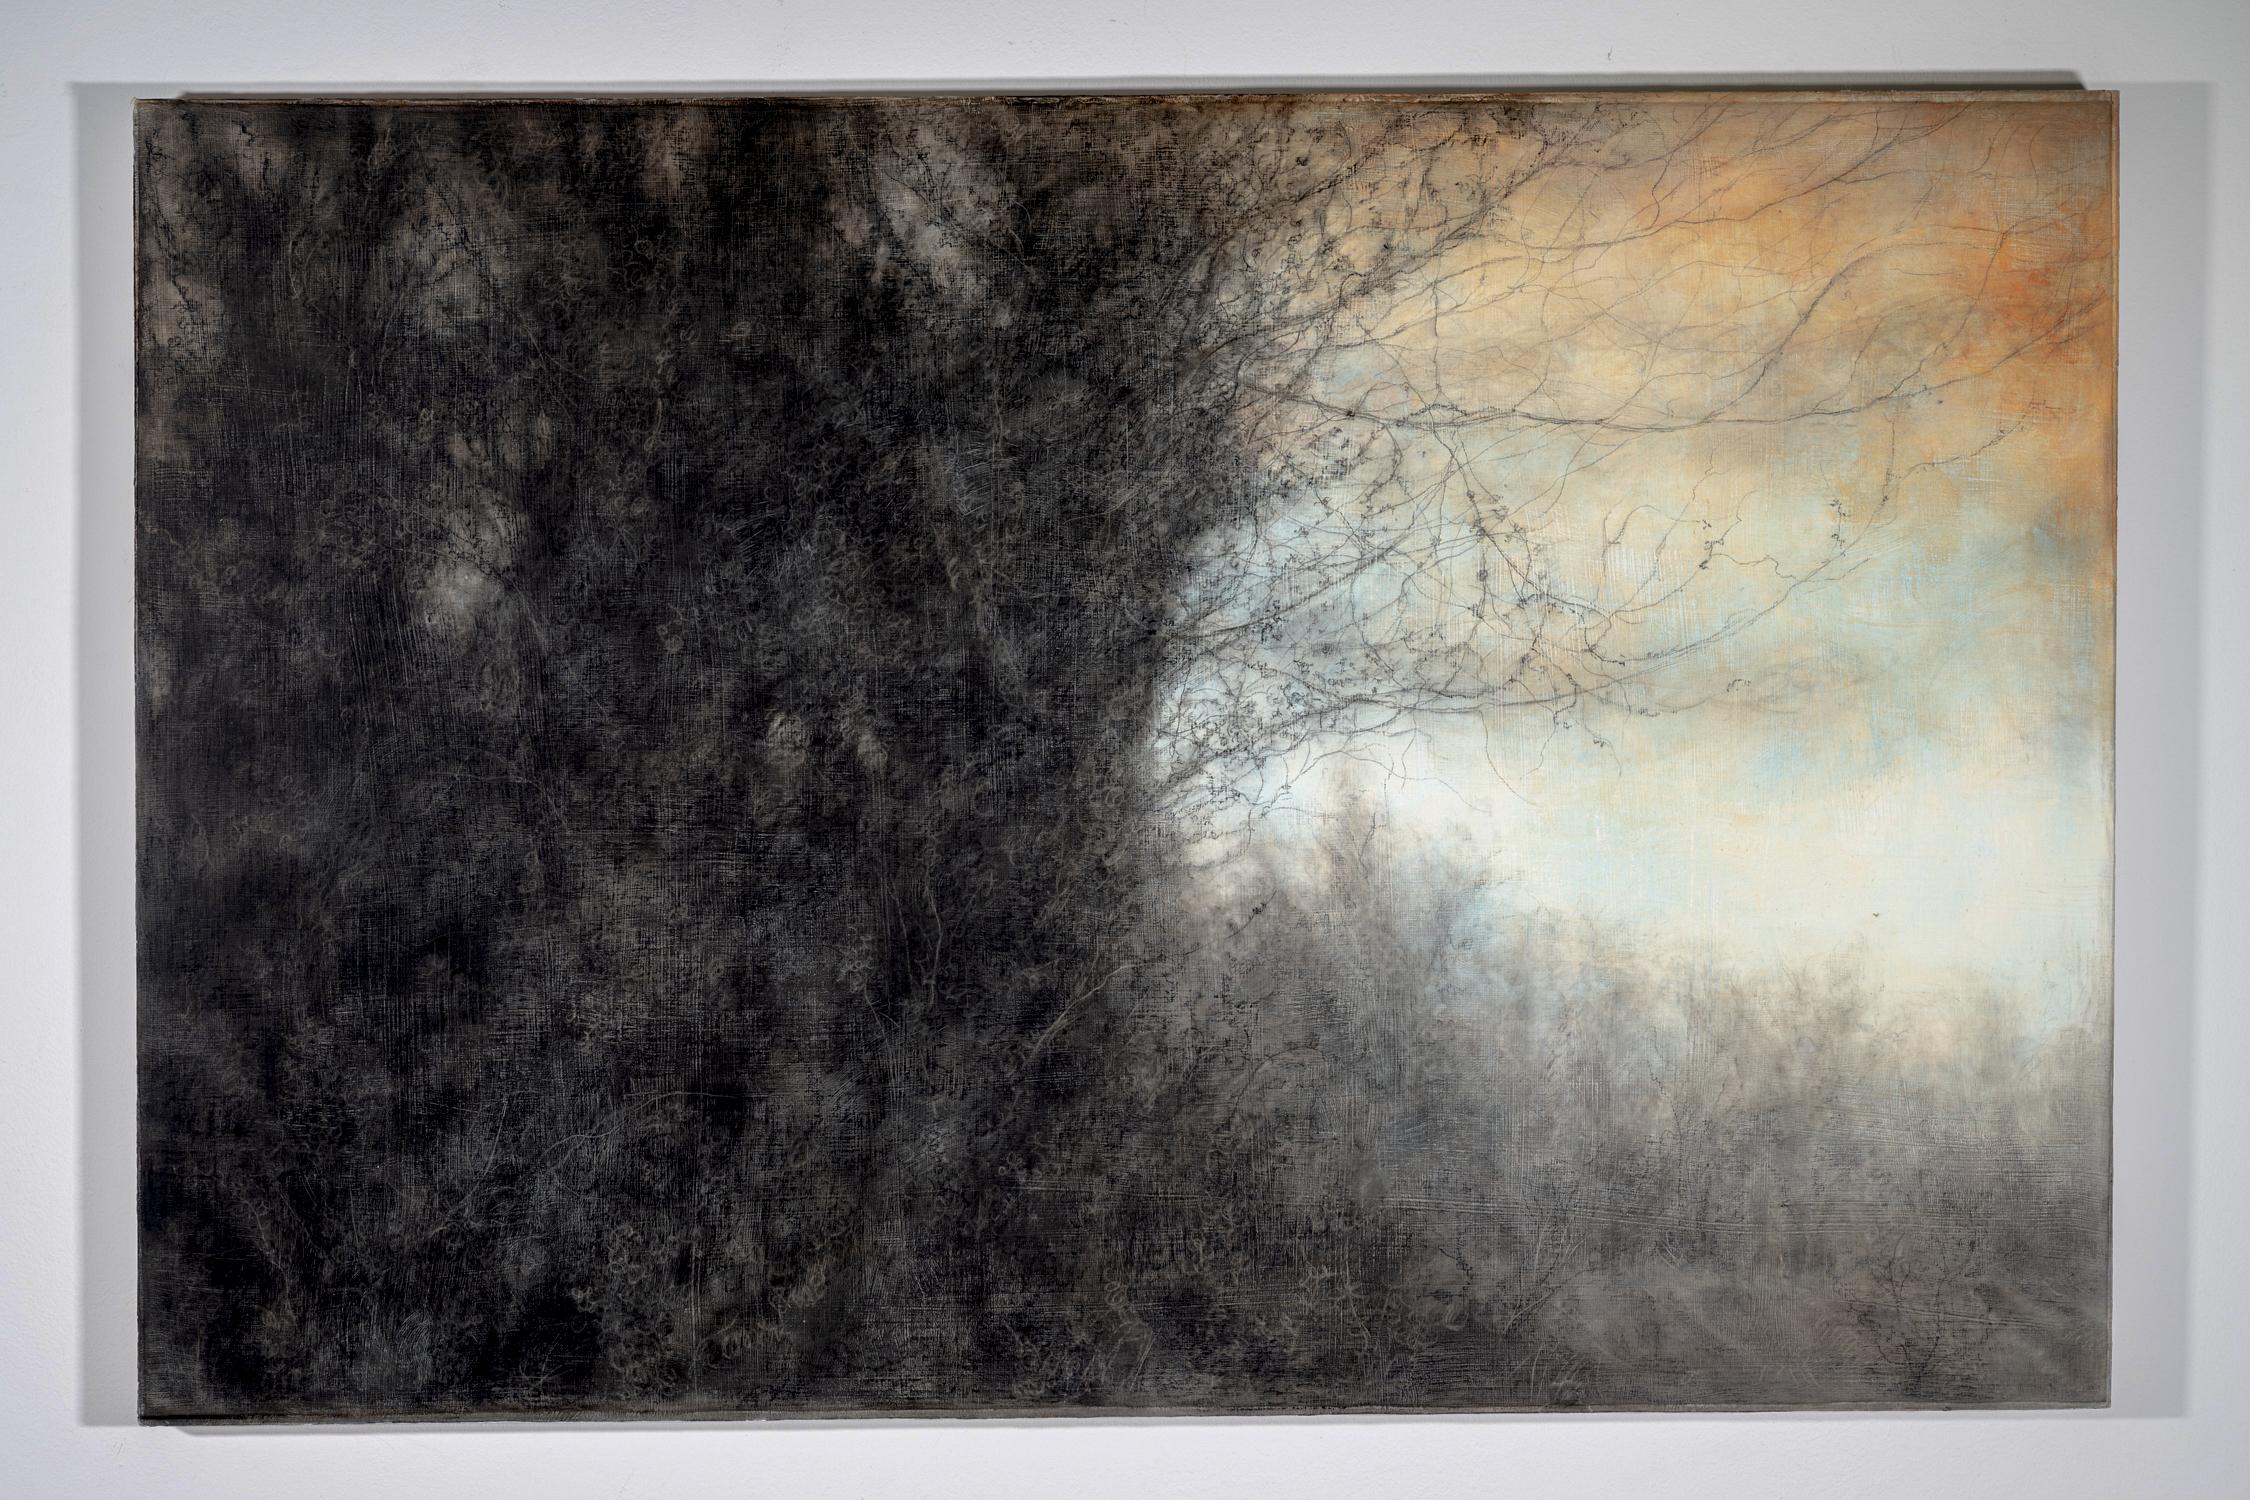 Swathe (Dramatic Contemporary Charcoal Drawing of Landscape with Pale Blue Sky) - Art by Sue Bryan